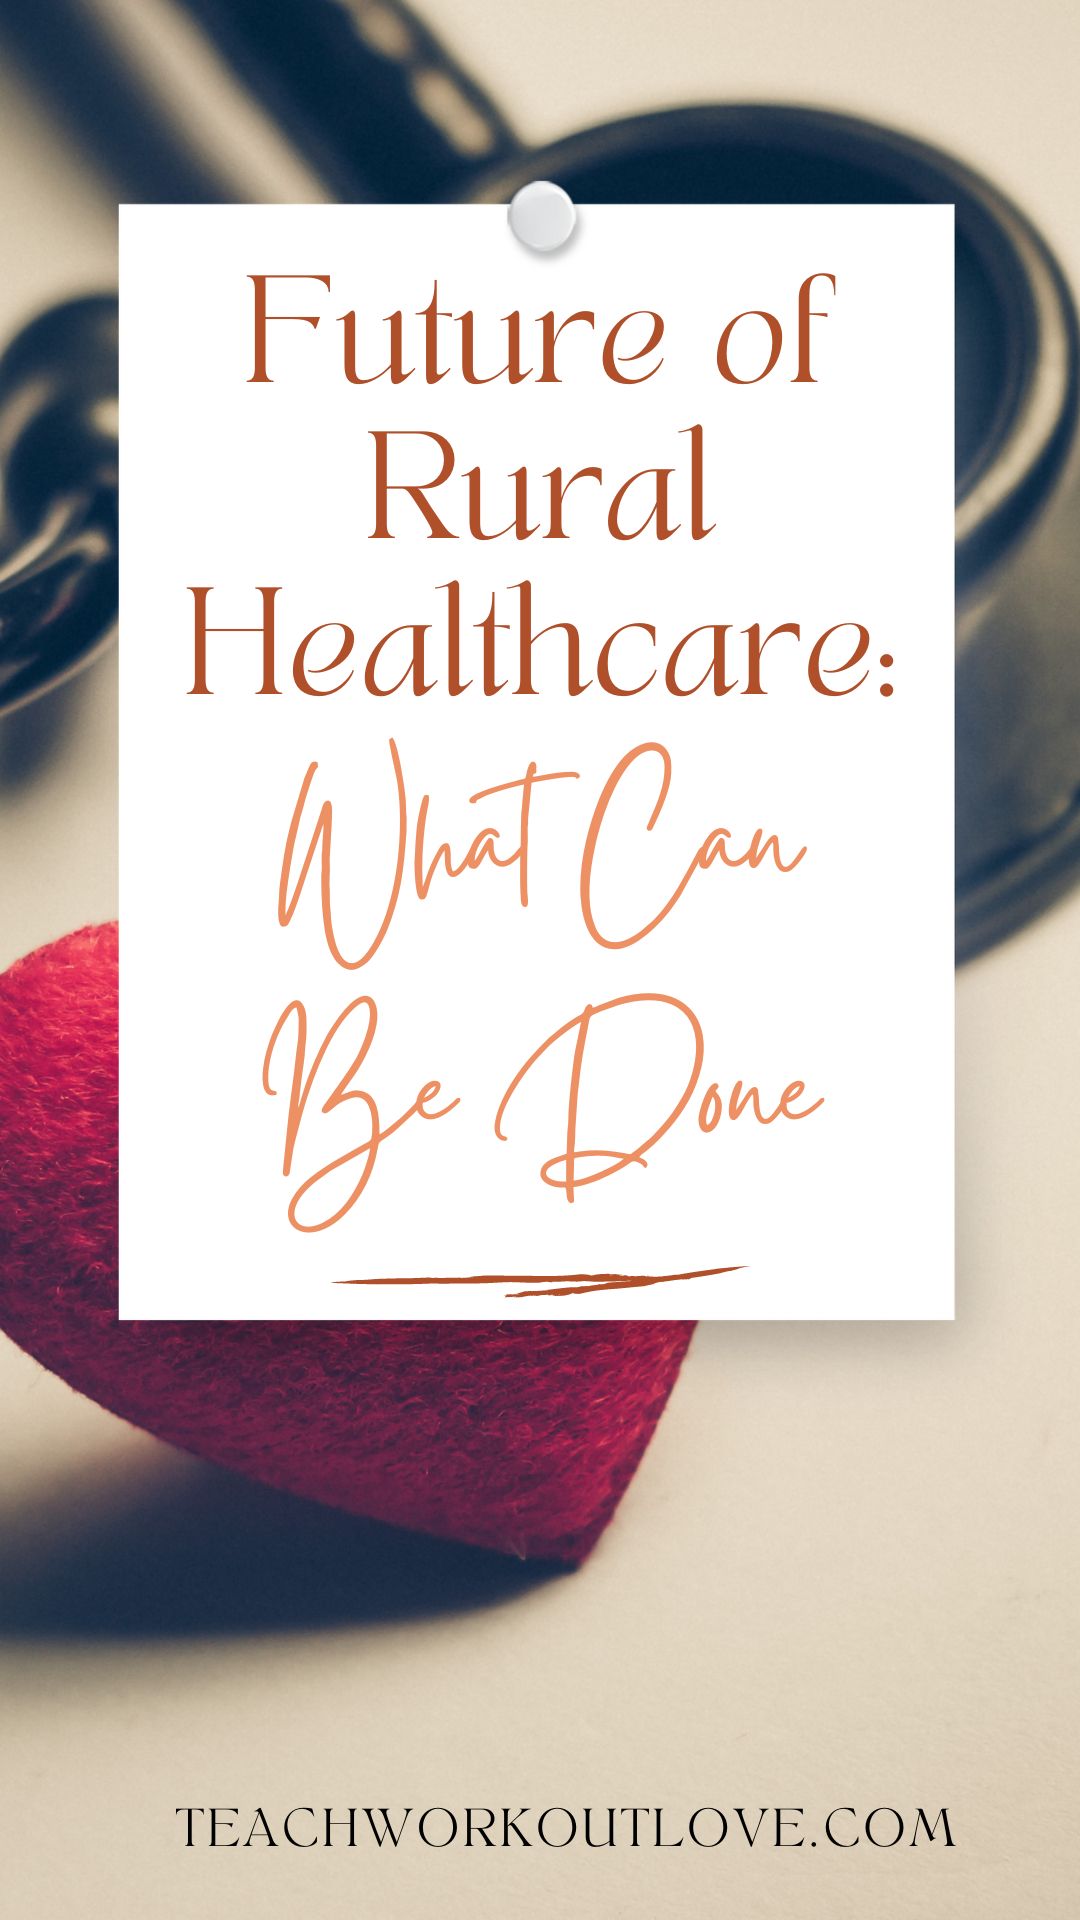 Live in the country and need healthcare? Here are some innovative solutions for addressing representation and access in rural healthcare.